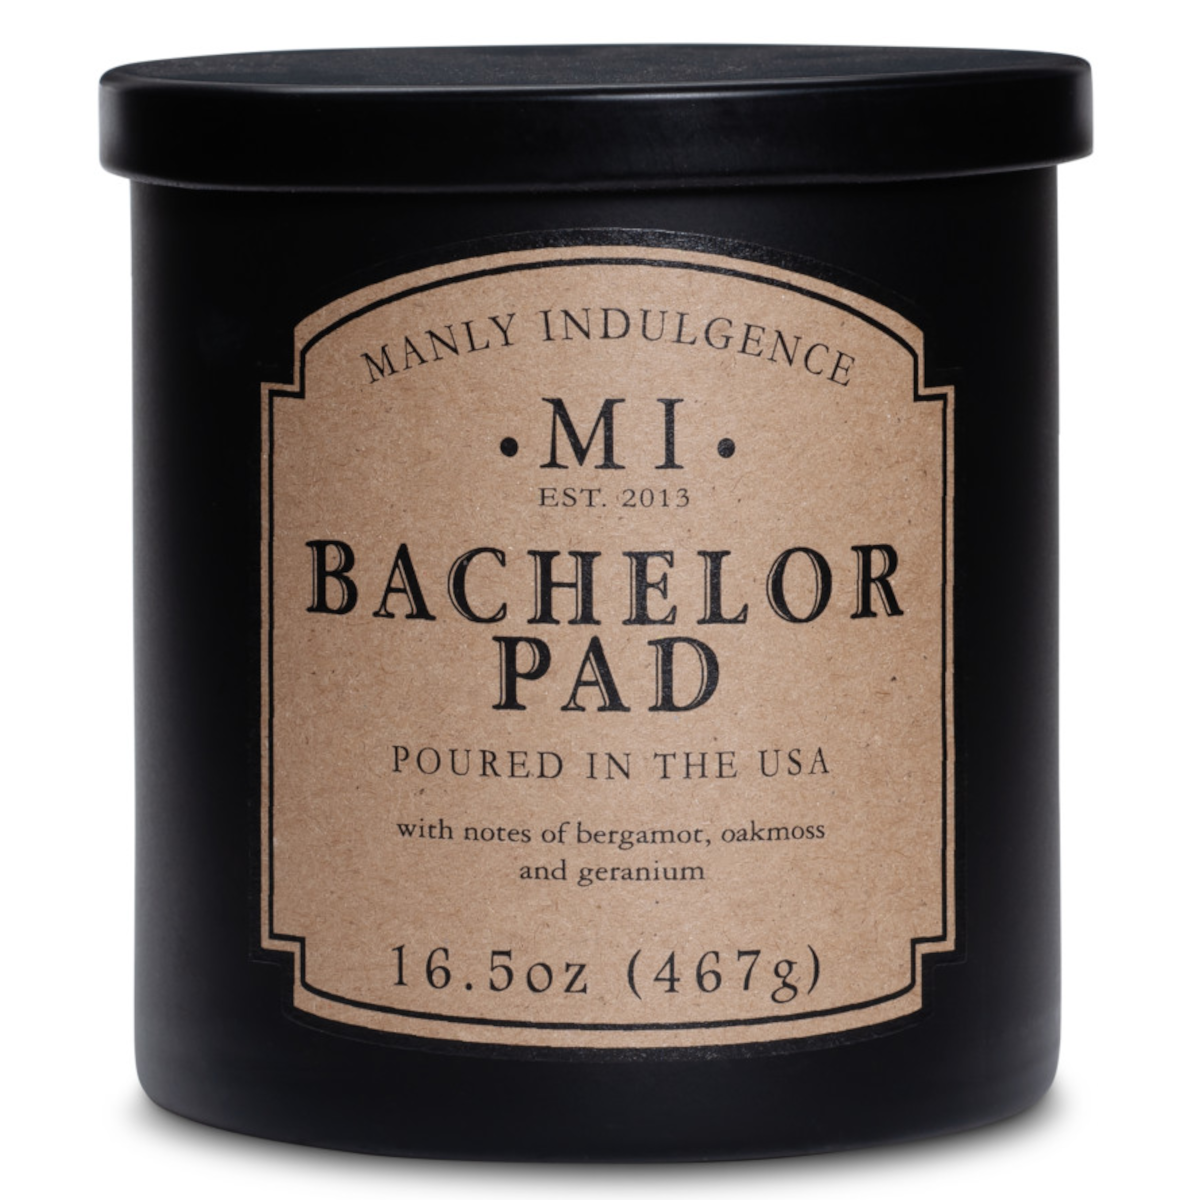 Colonial Candle - Manly Indulgence - Classic - Bachelor Pad - geurkaars voor mannen - 467 gram Colonial Candle